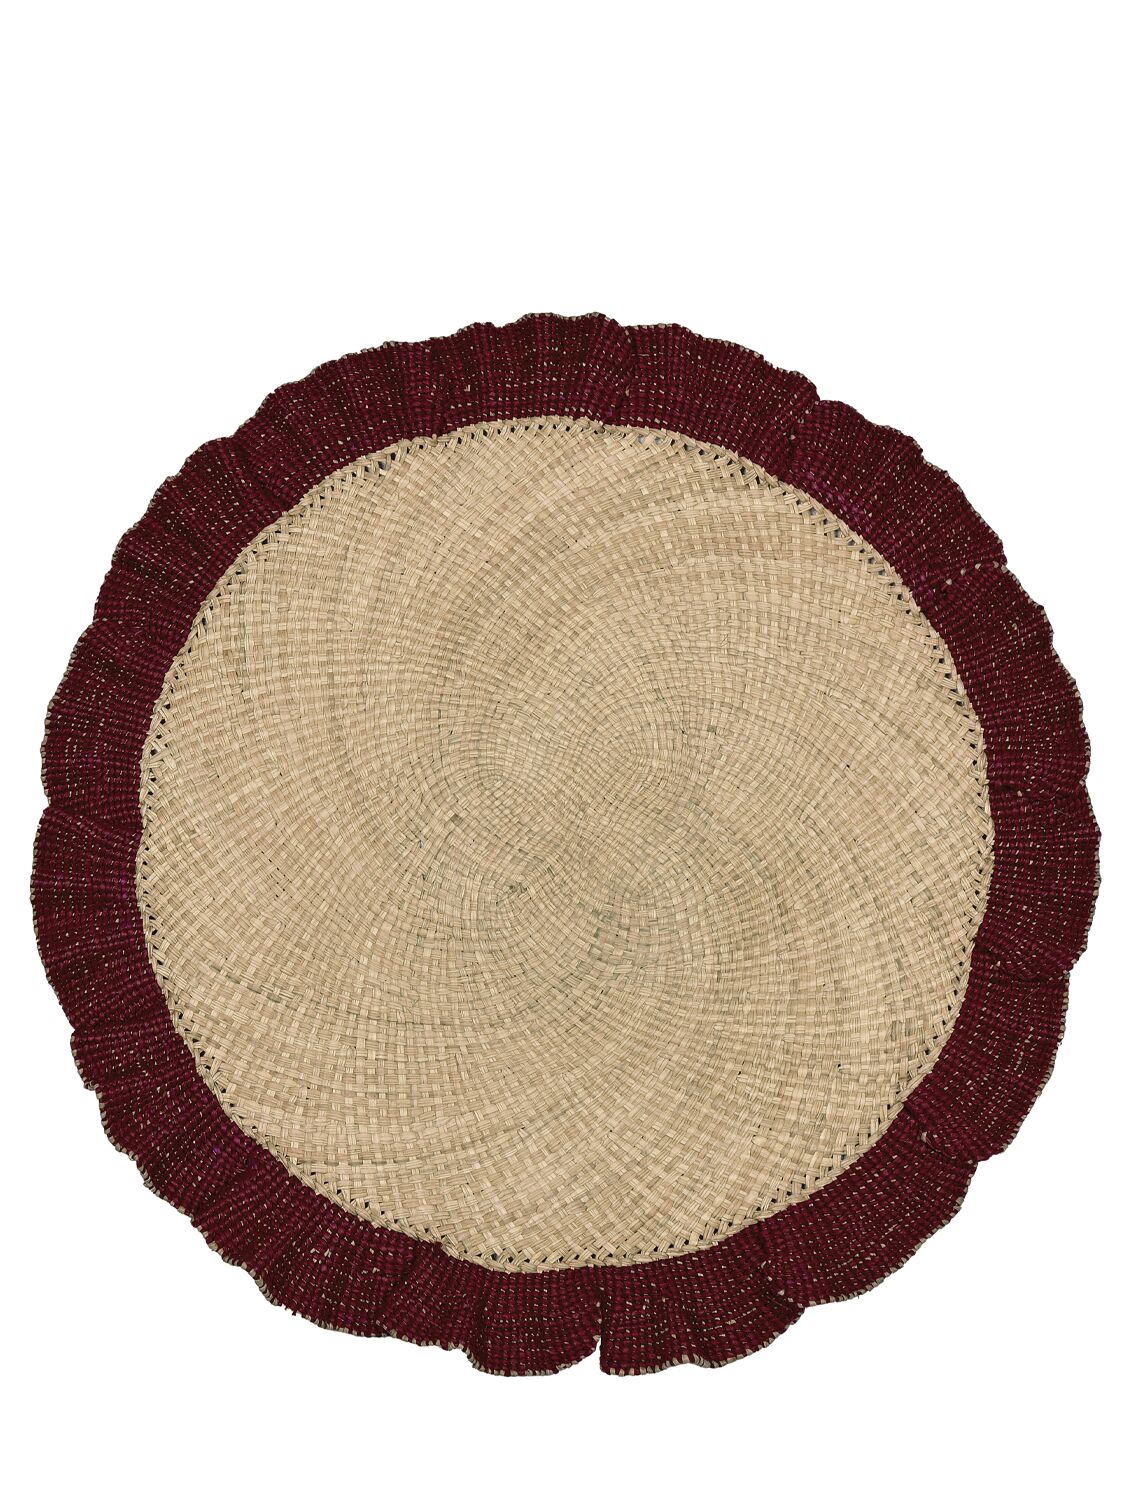 Johanna Ortiz Set Of 2 Iraca Palm Placemats In Brown